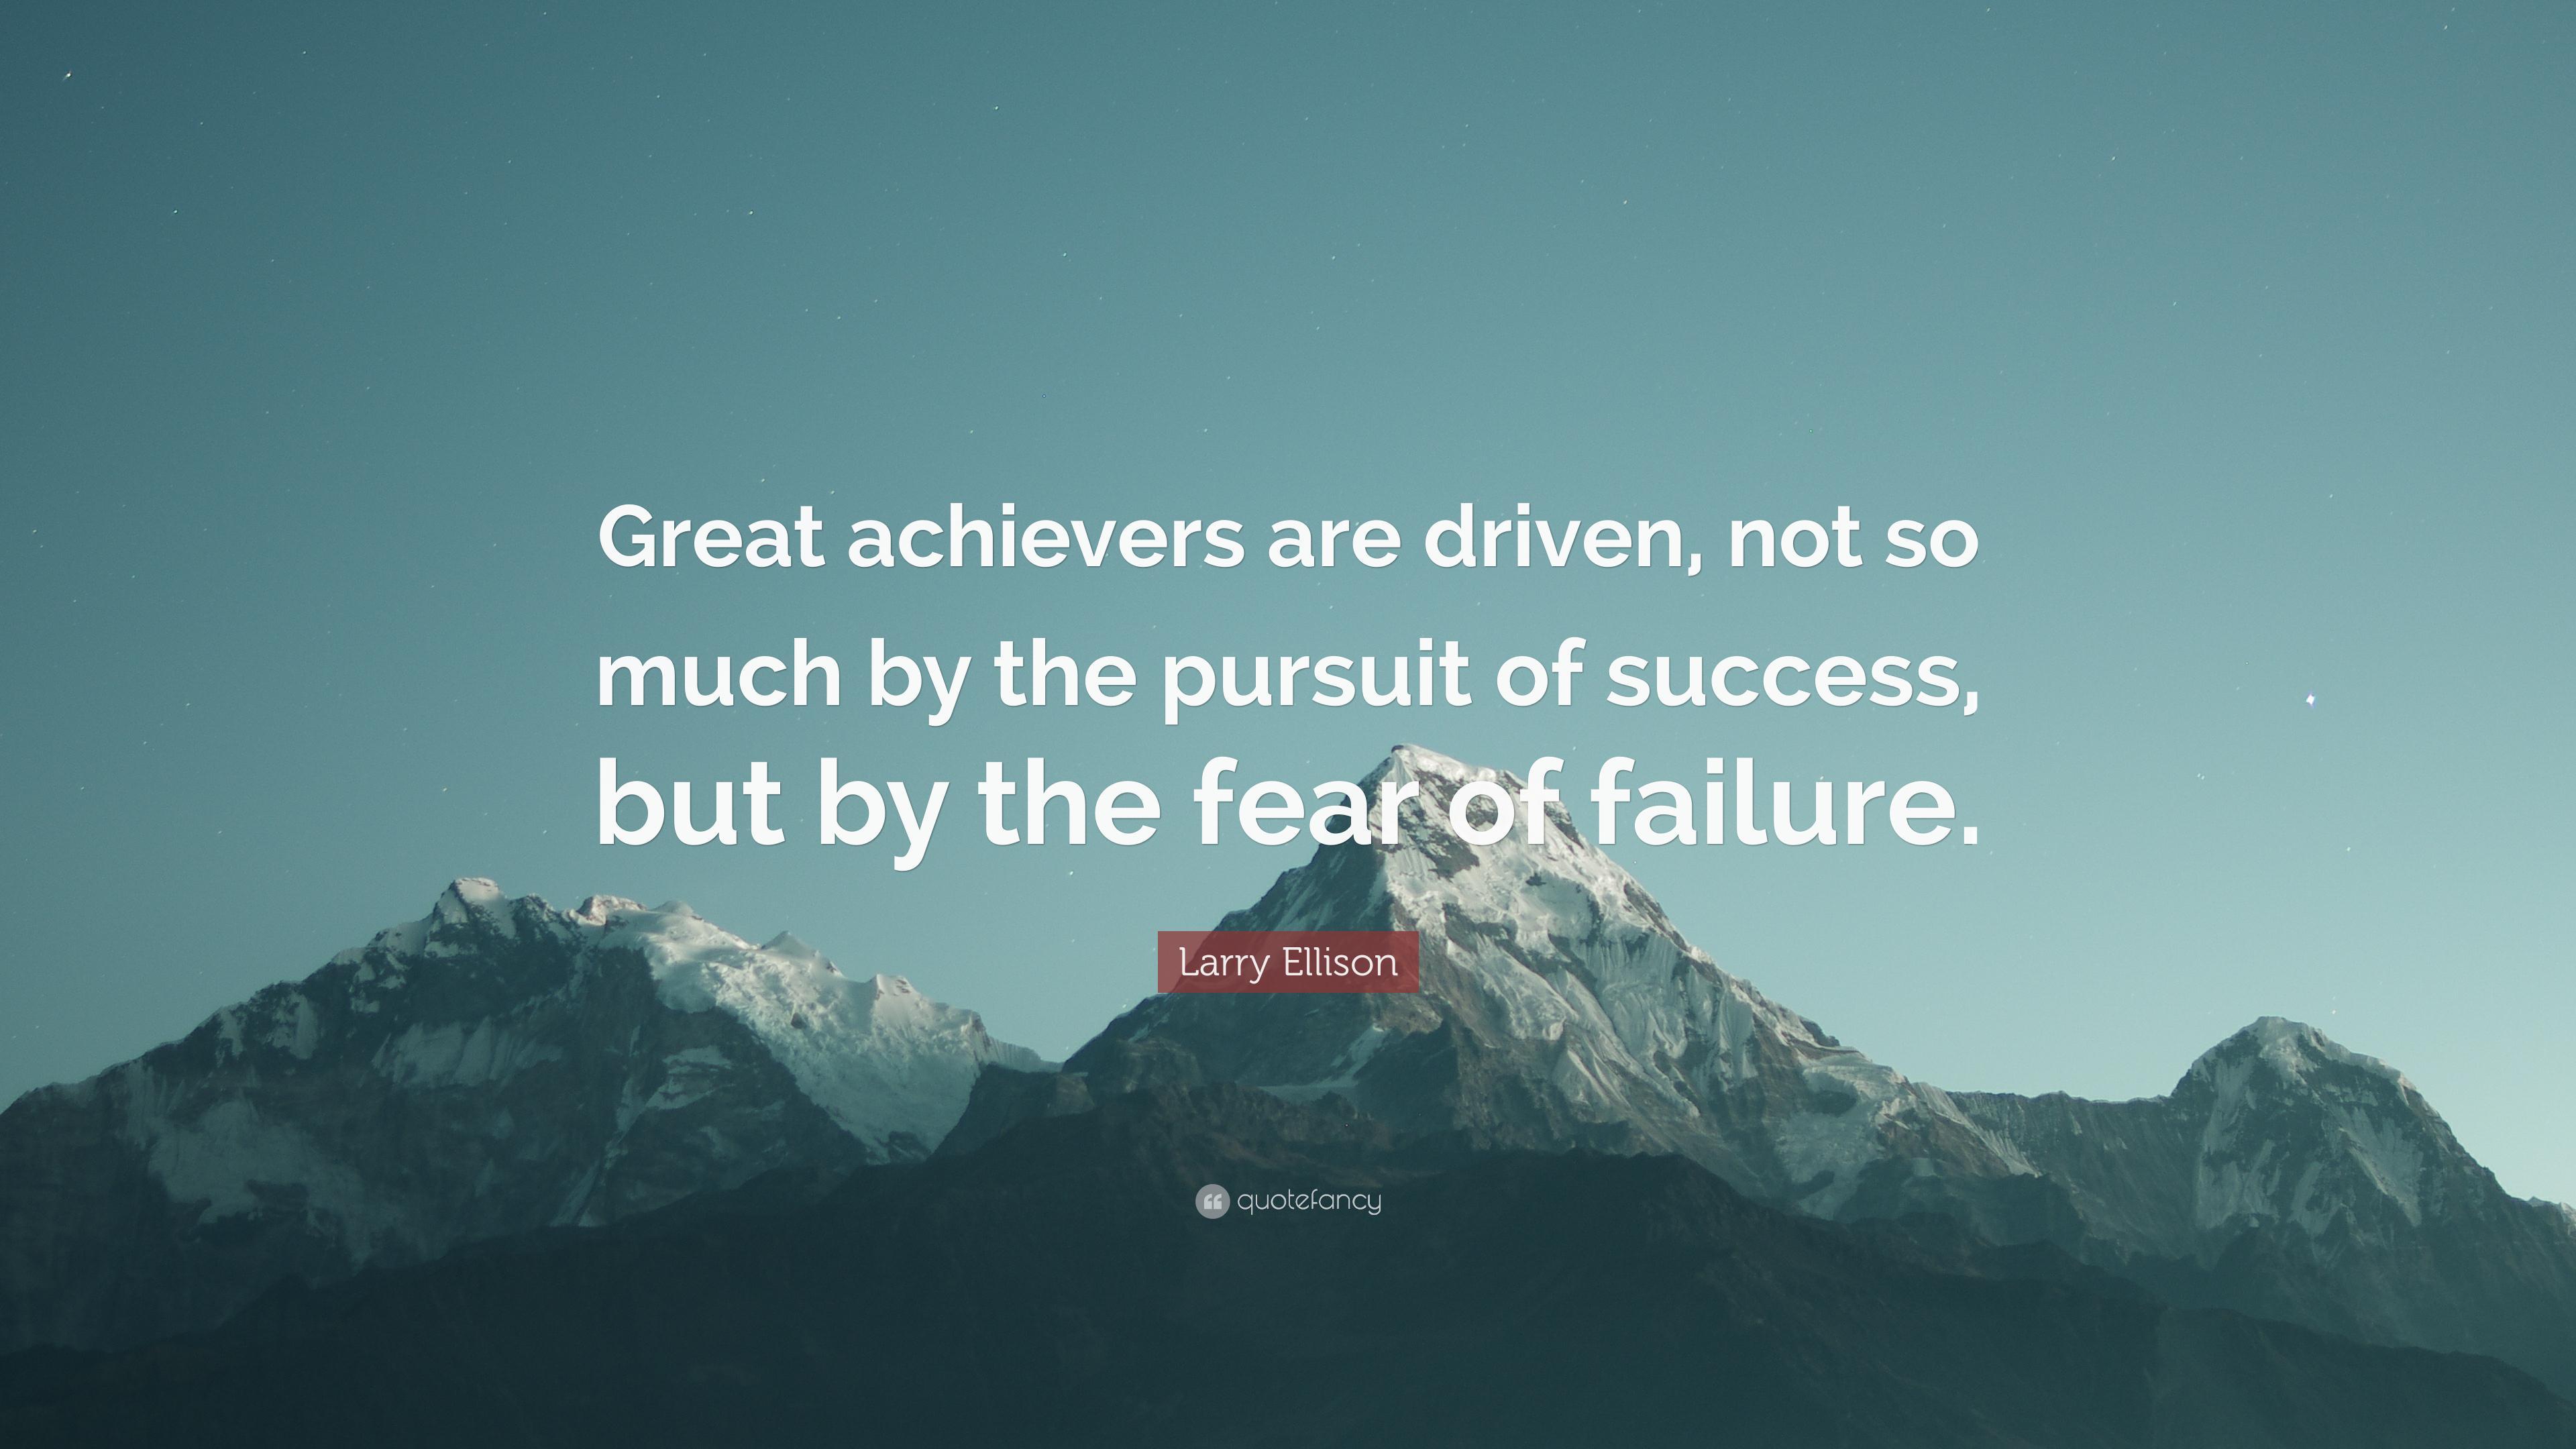 Larry Ellison Quote: “Great achievers are driven, not so much by